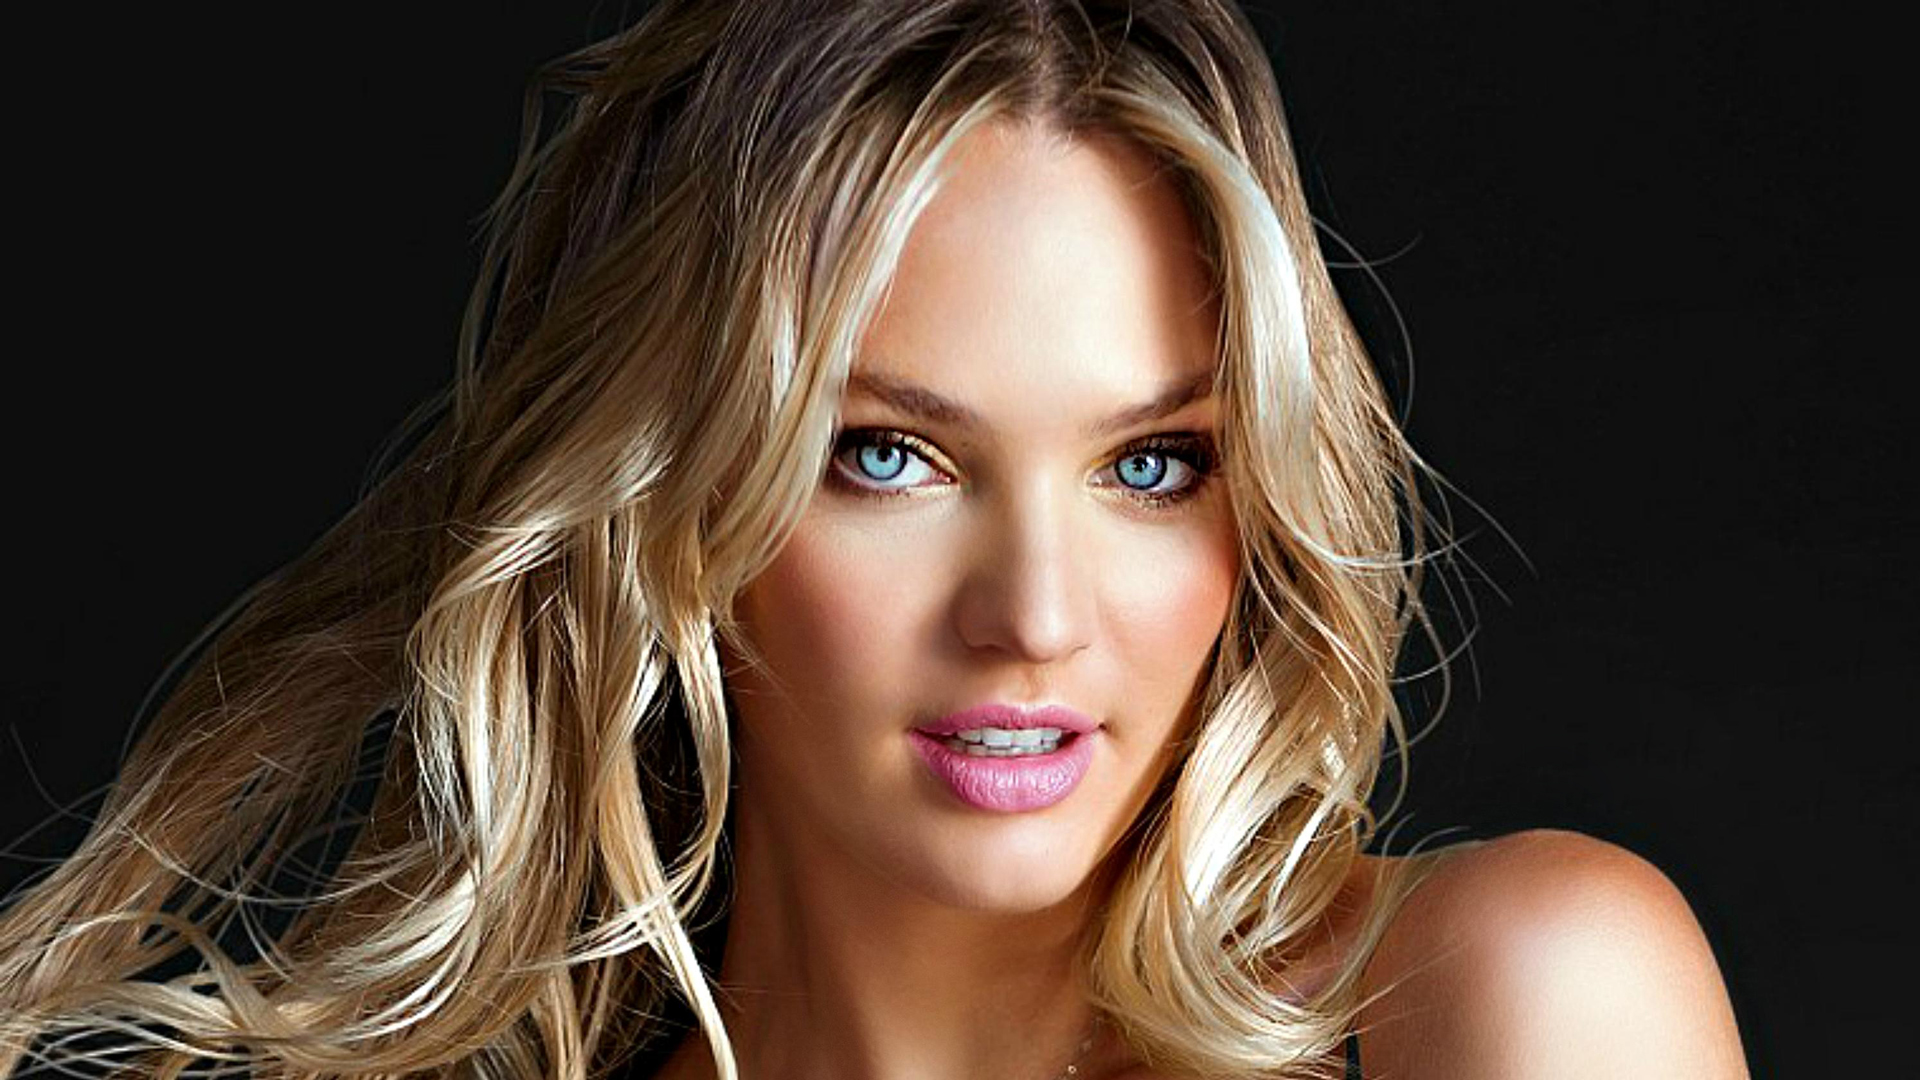 Candice Swanepoel Backgrounds, Compatible - PC, Mobile, Gadgets| 1920x1080 px